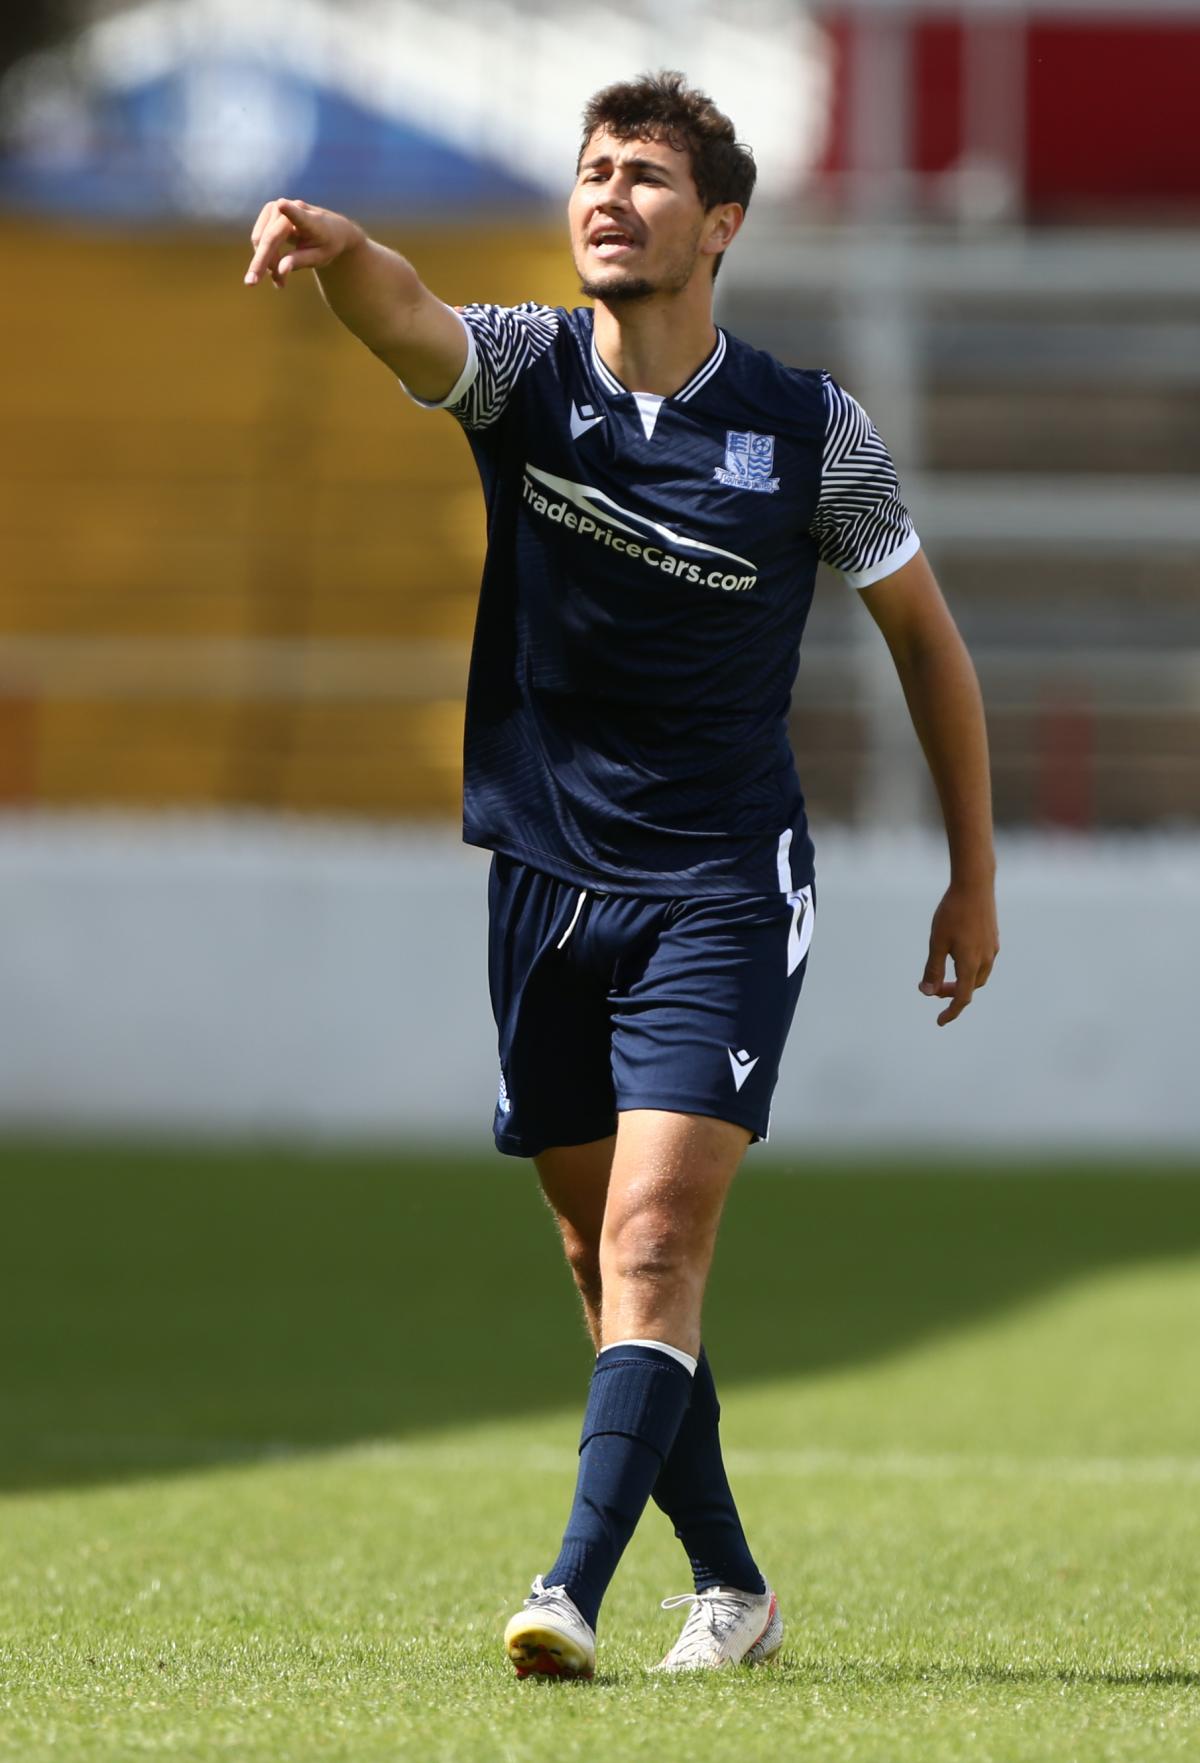 15. Lewis Gard, Position: Midfielder, Age: 21, DOB: 26/8/99, Former clubs: Product of club's youth system, Blues career: 19/1